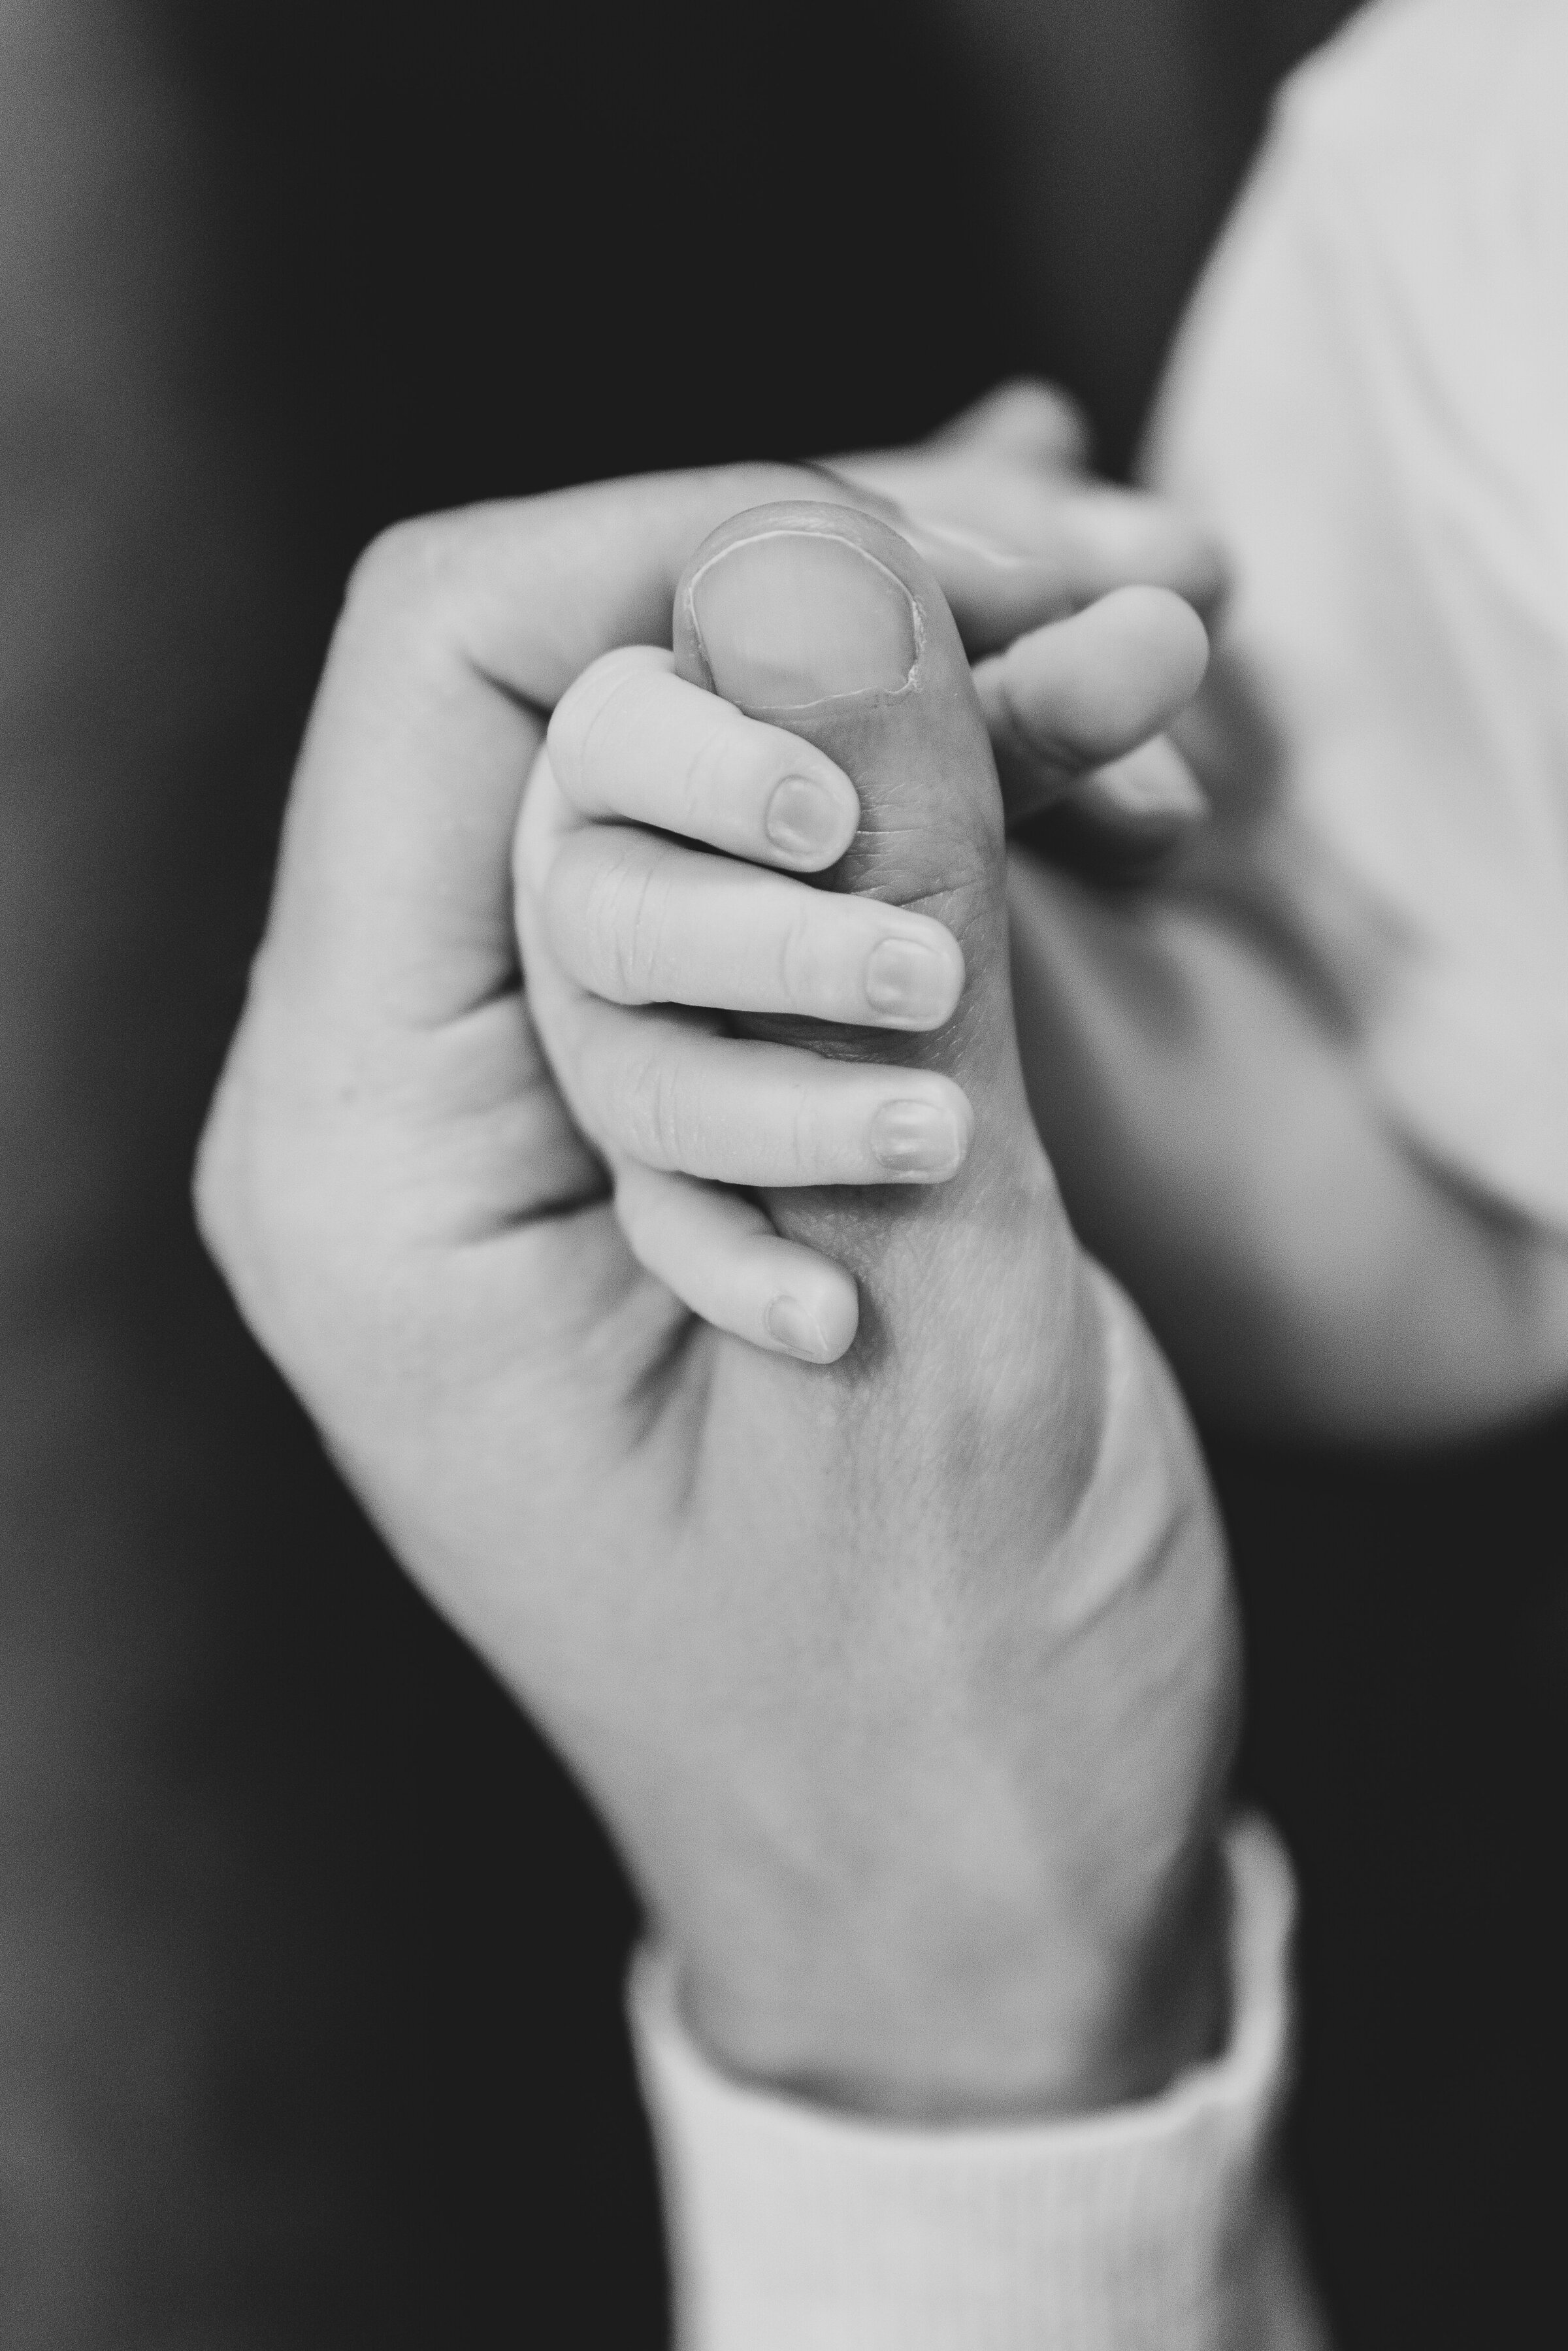 Newborn baby wrapping their finger around their dad's thumb